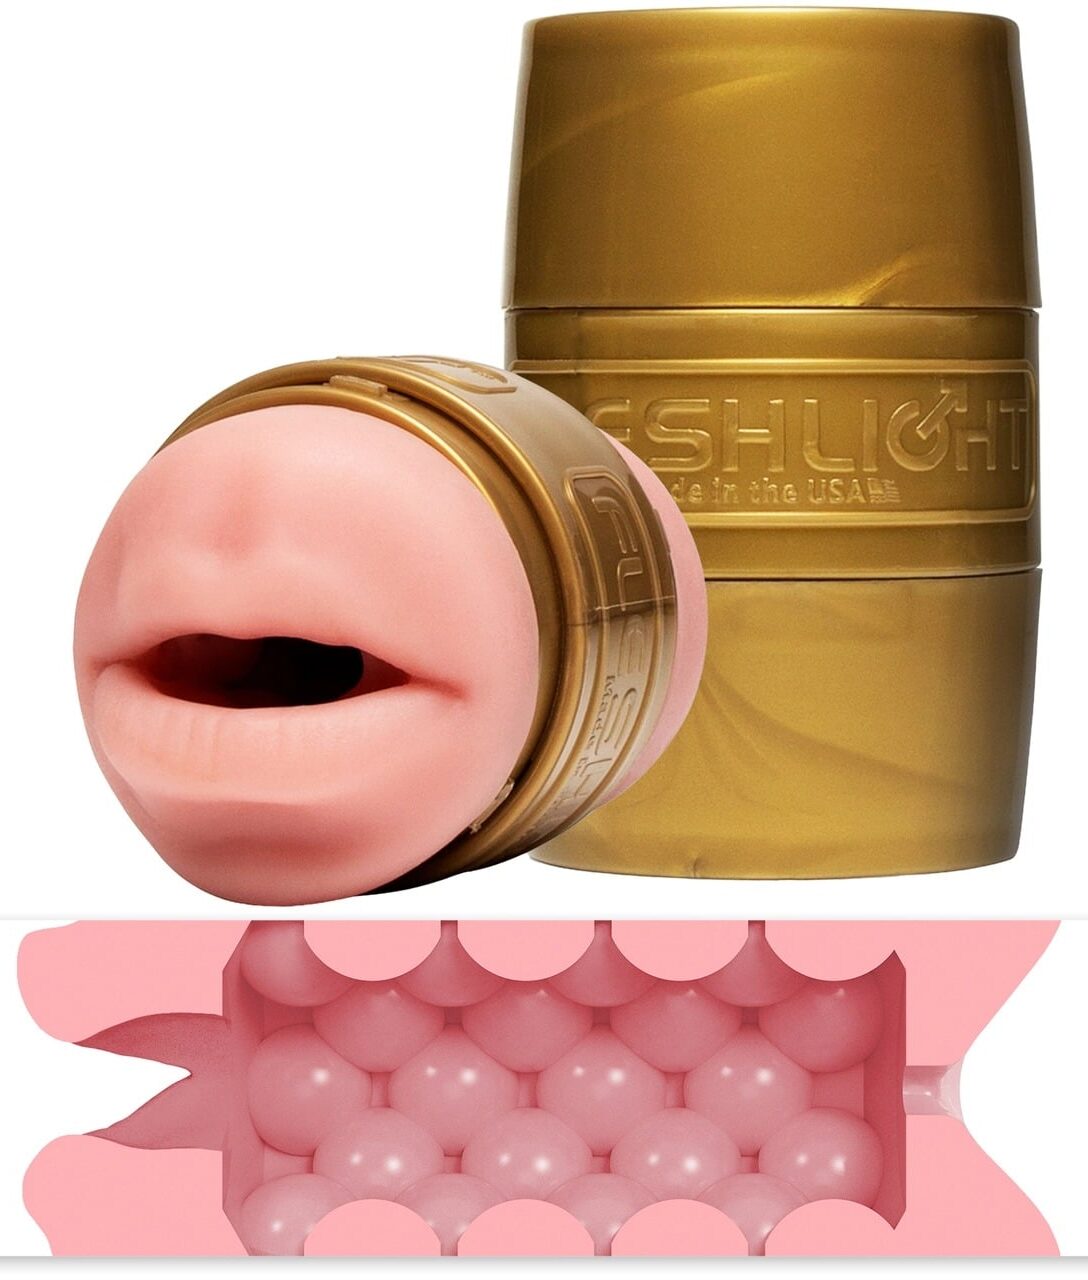 Fleshlight in mouth